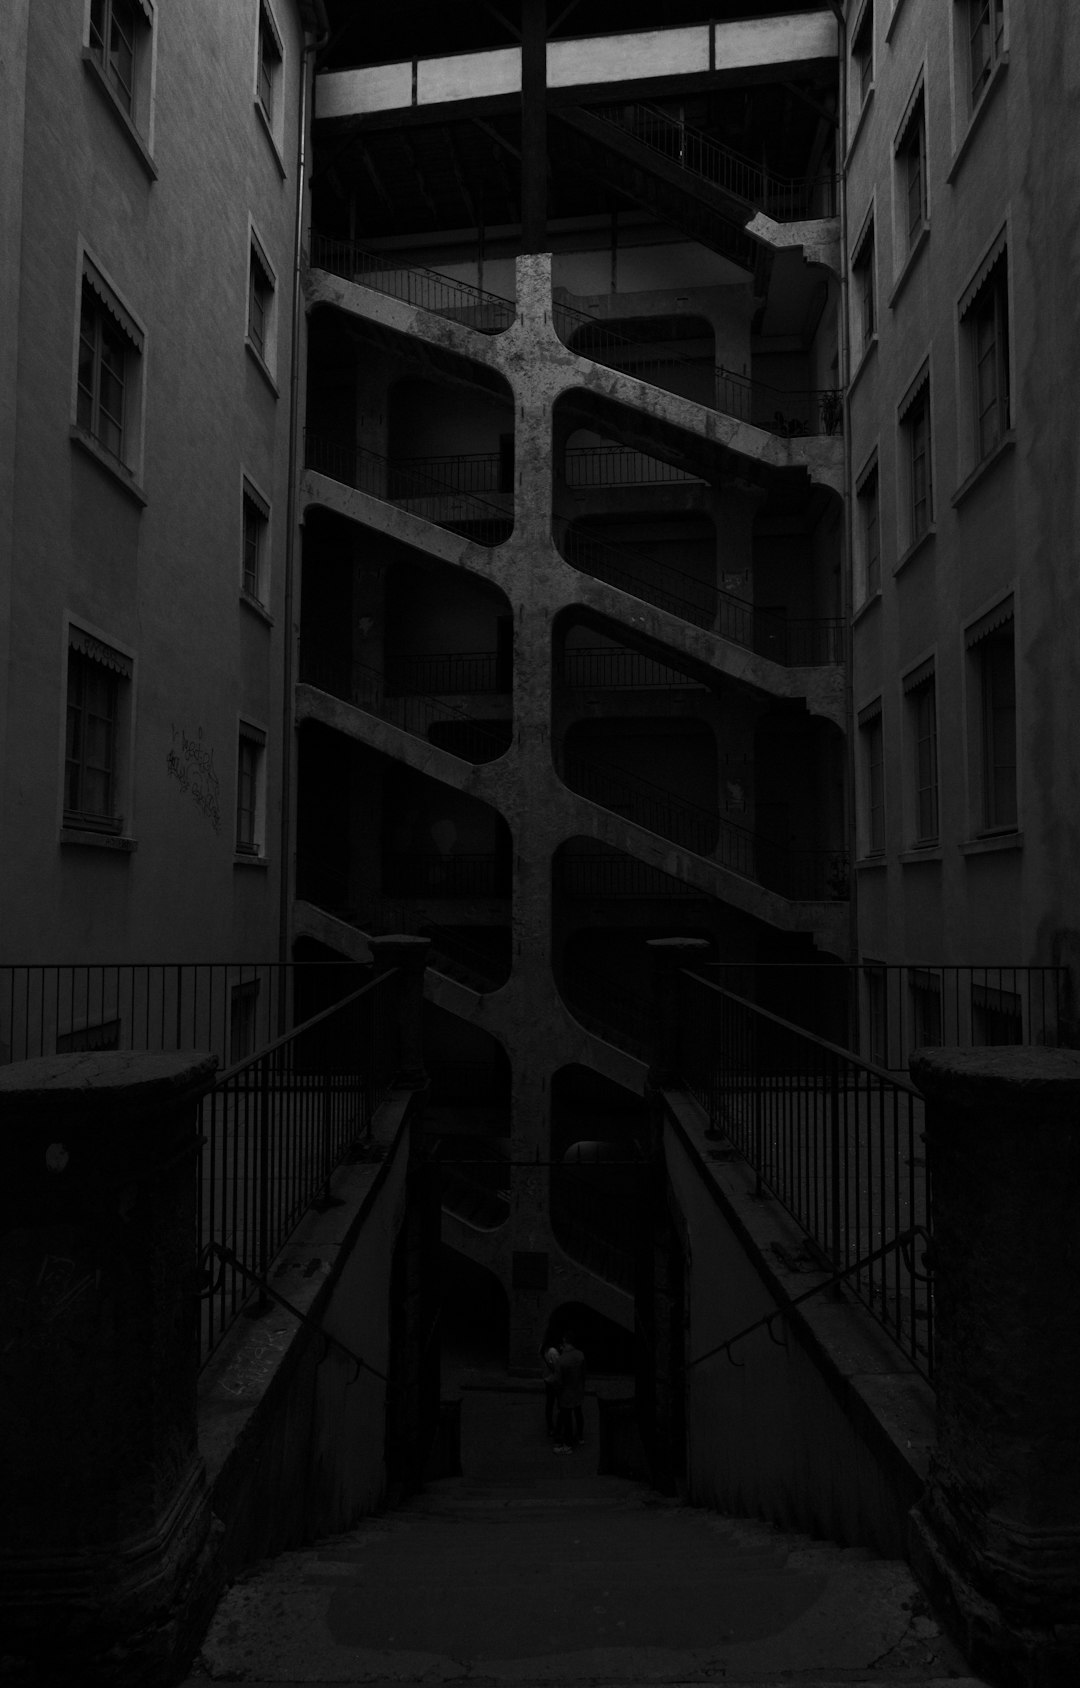 Traboule.

Among a handful of cities traversed by traboules, Lyon is the most famous for its own.

Traboules are hallways through private buildings which were usually used by silk manufacturers et al. to move their products while being sheltered from the weather caprices. Some are still open to the public a few hours a day... if one dares to push a few closed doors to find them.

You can read more about this on Wikipedia: https://en.wikipedia.org/wiki/Traboule